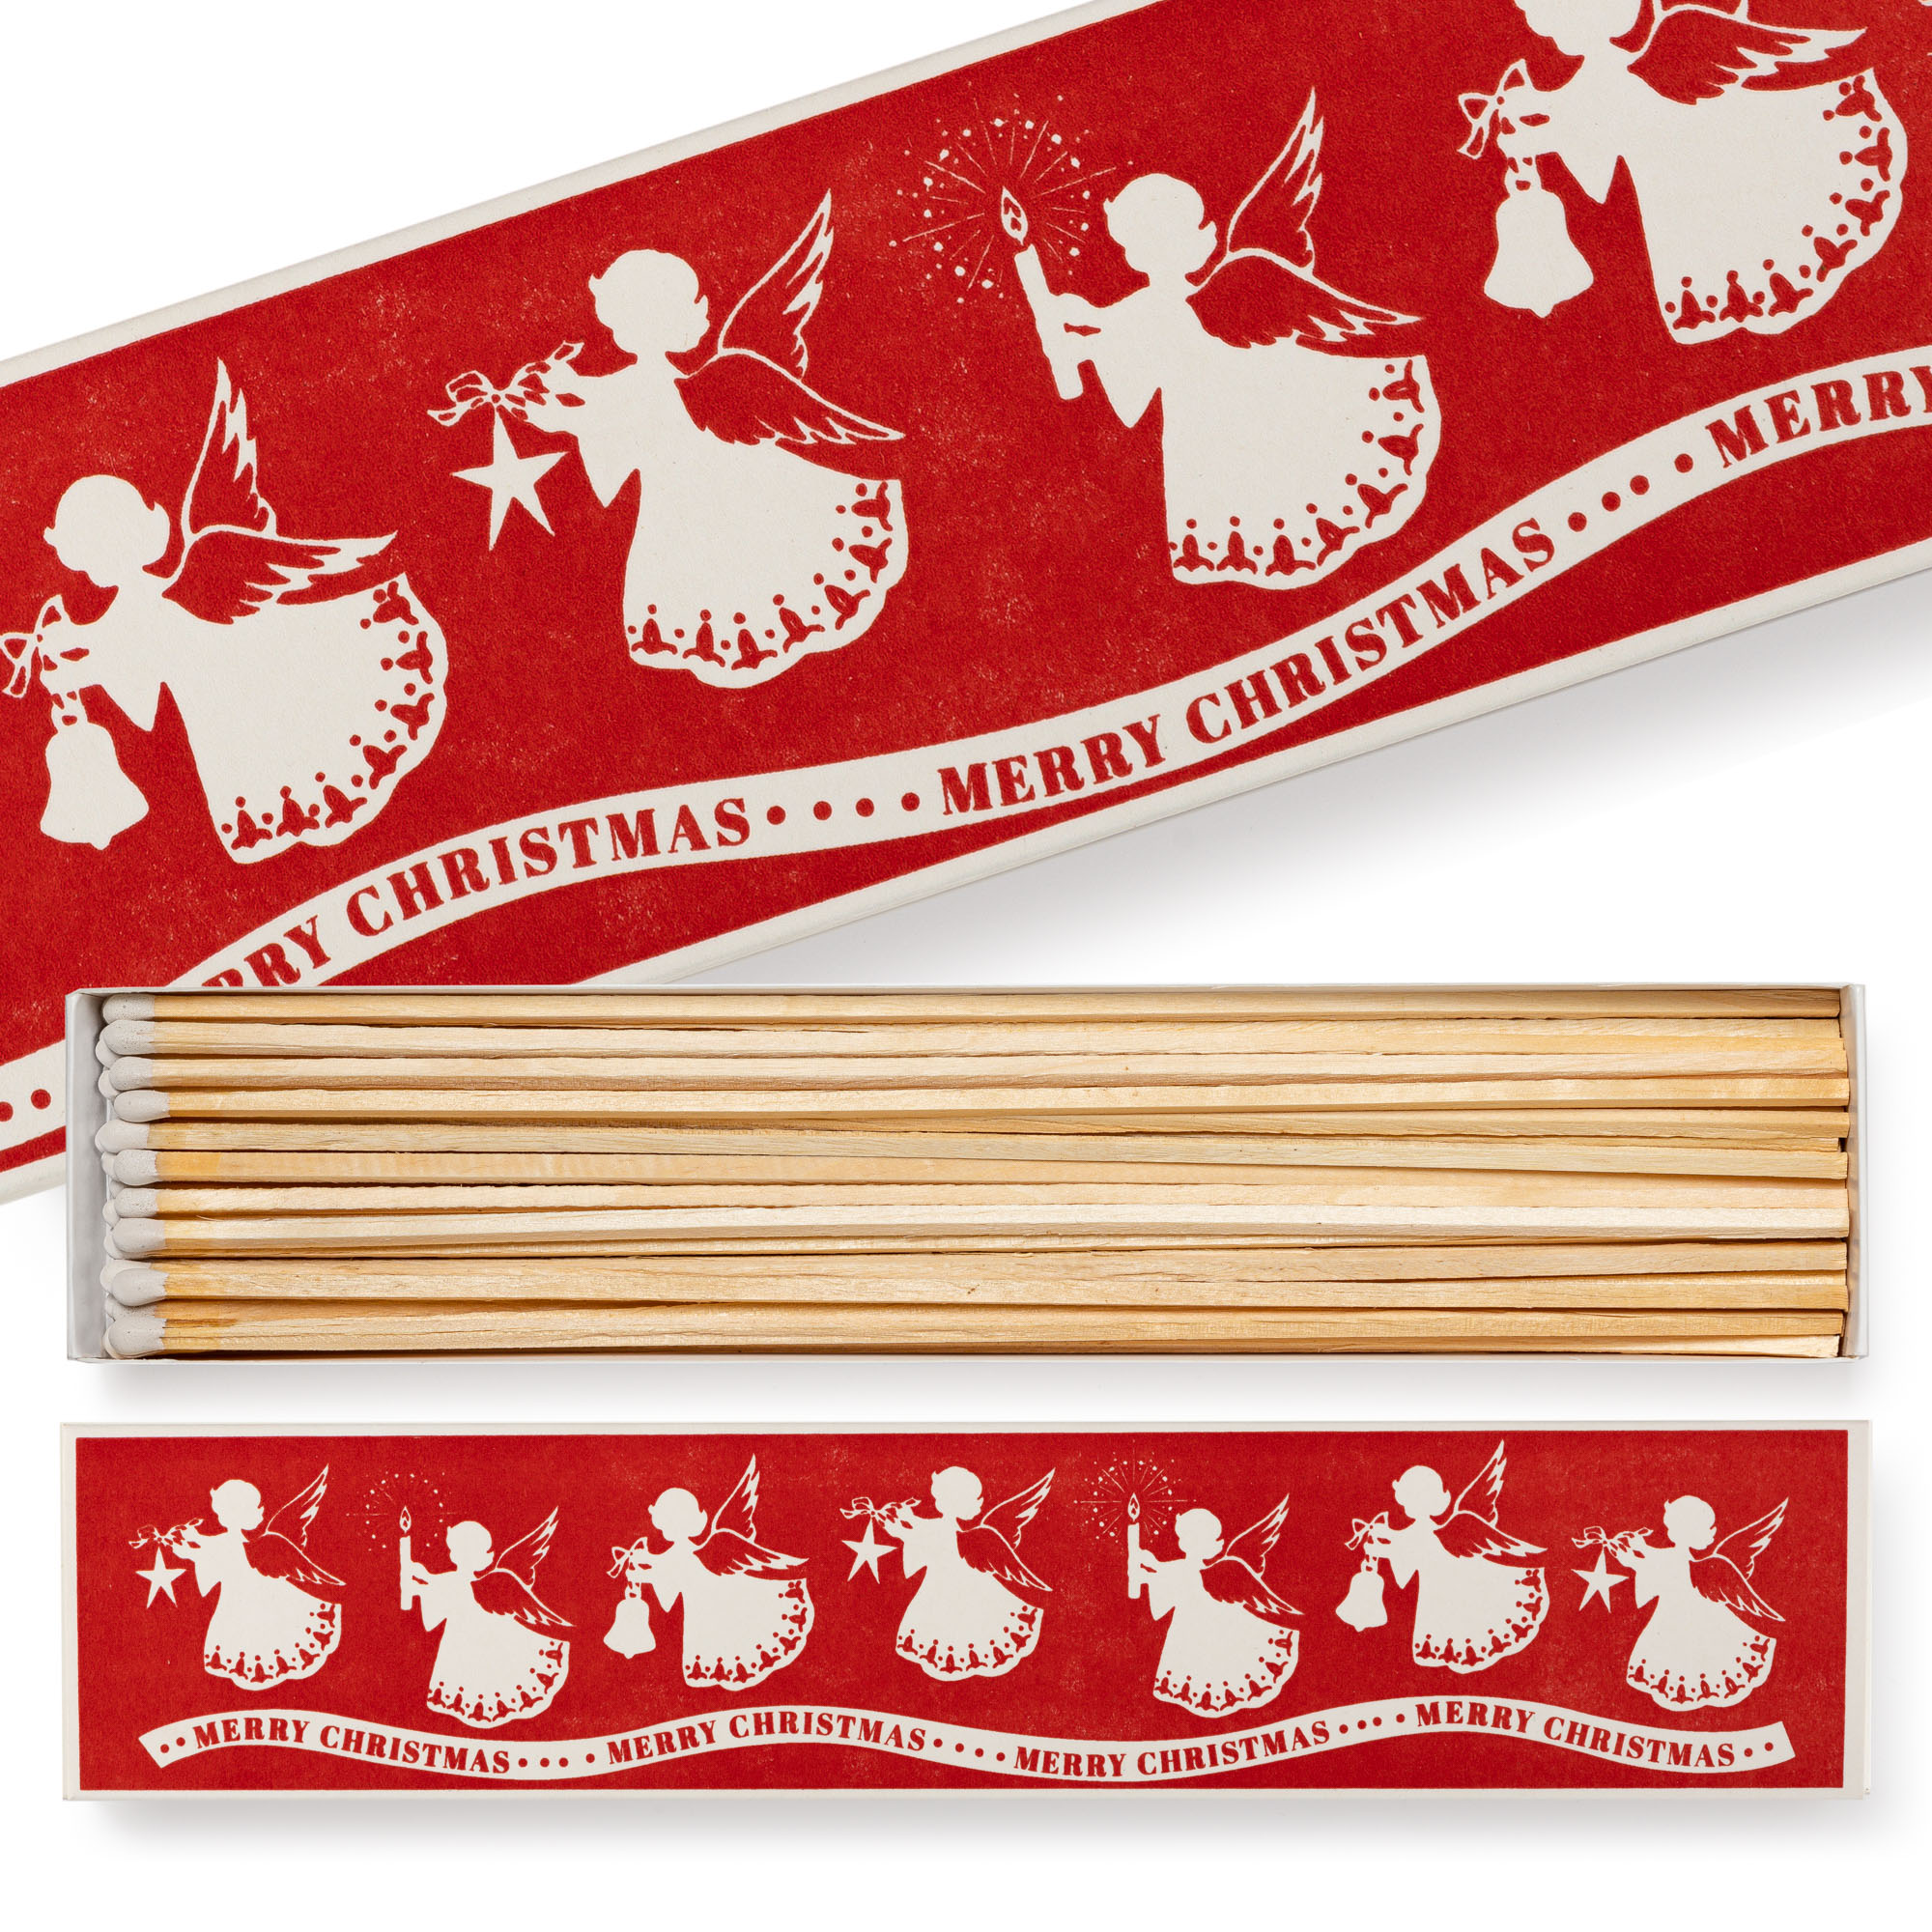 Festive Angels - Long Matchboxes - Archivist - from Archivist Gallery 